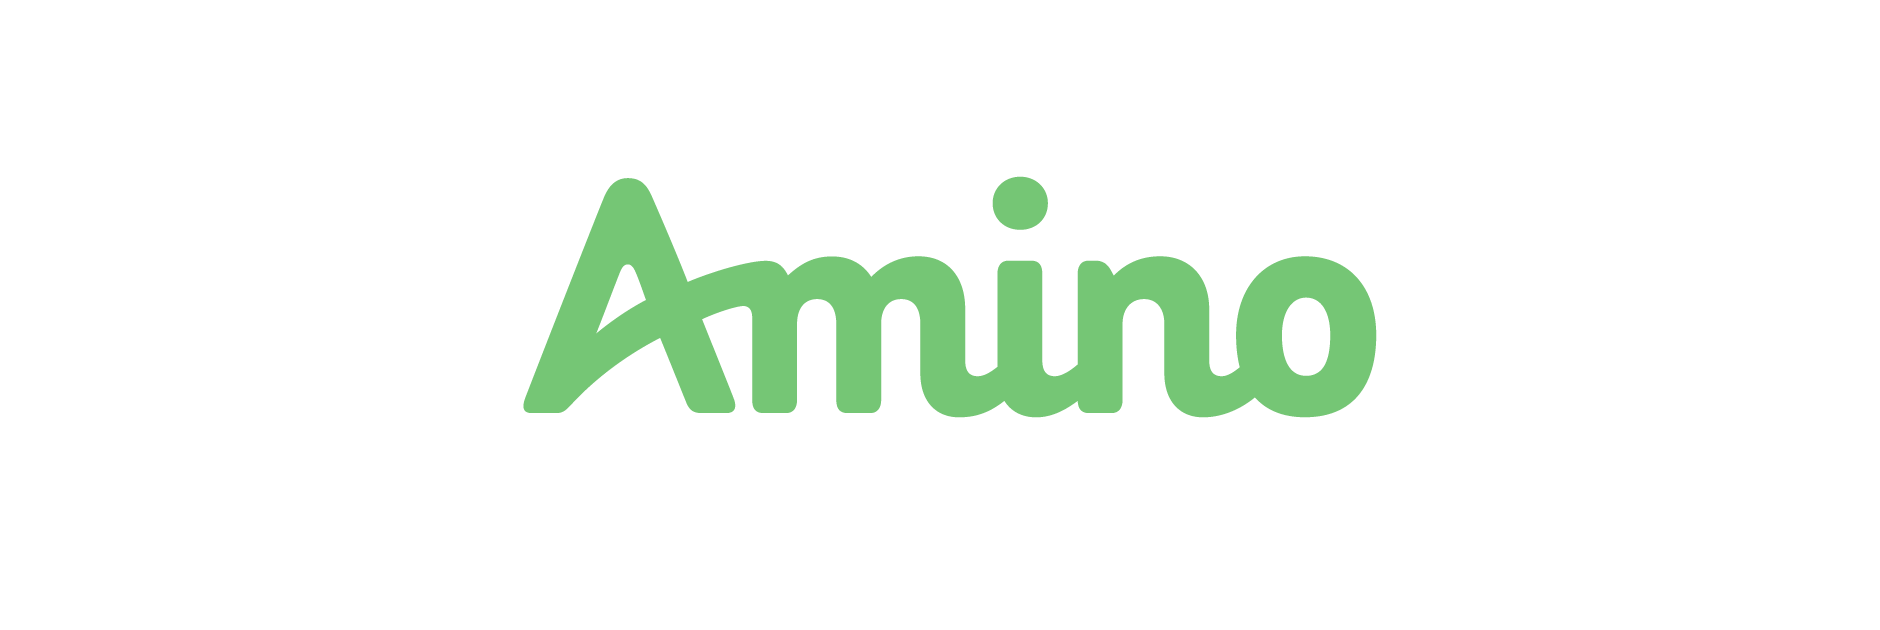 Amino Logo - Claire Coullon // Graphic Design, Typography & Lettering